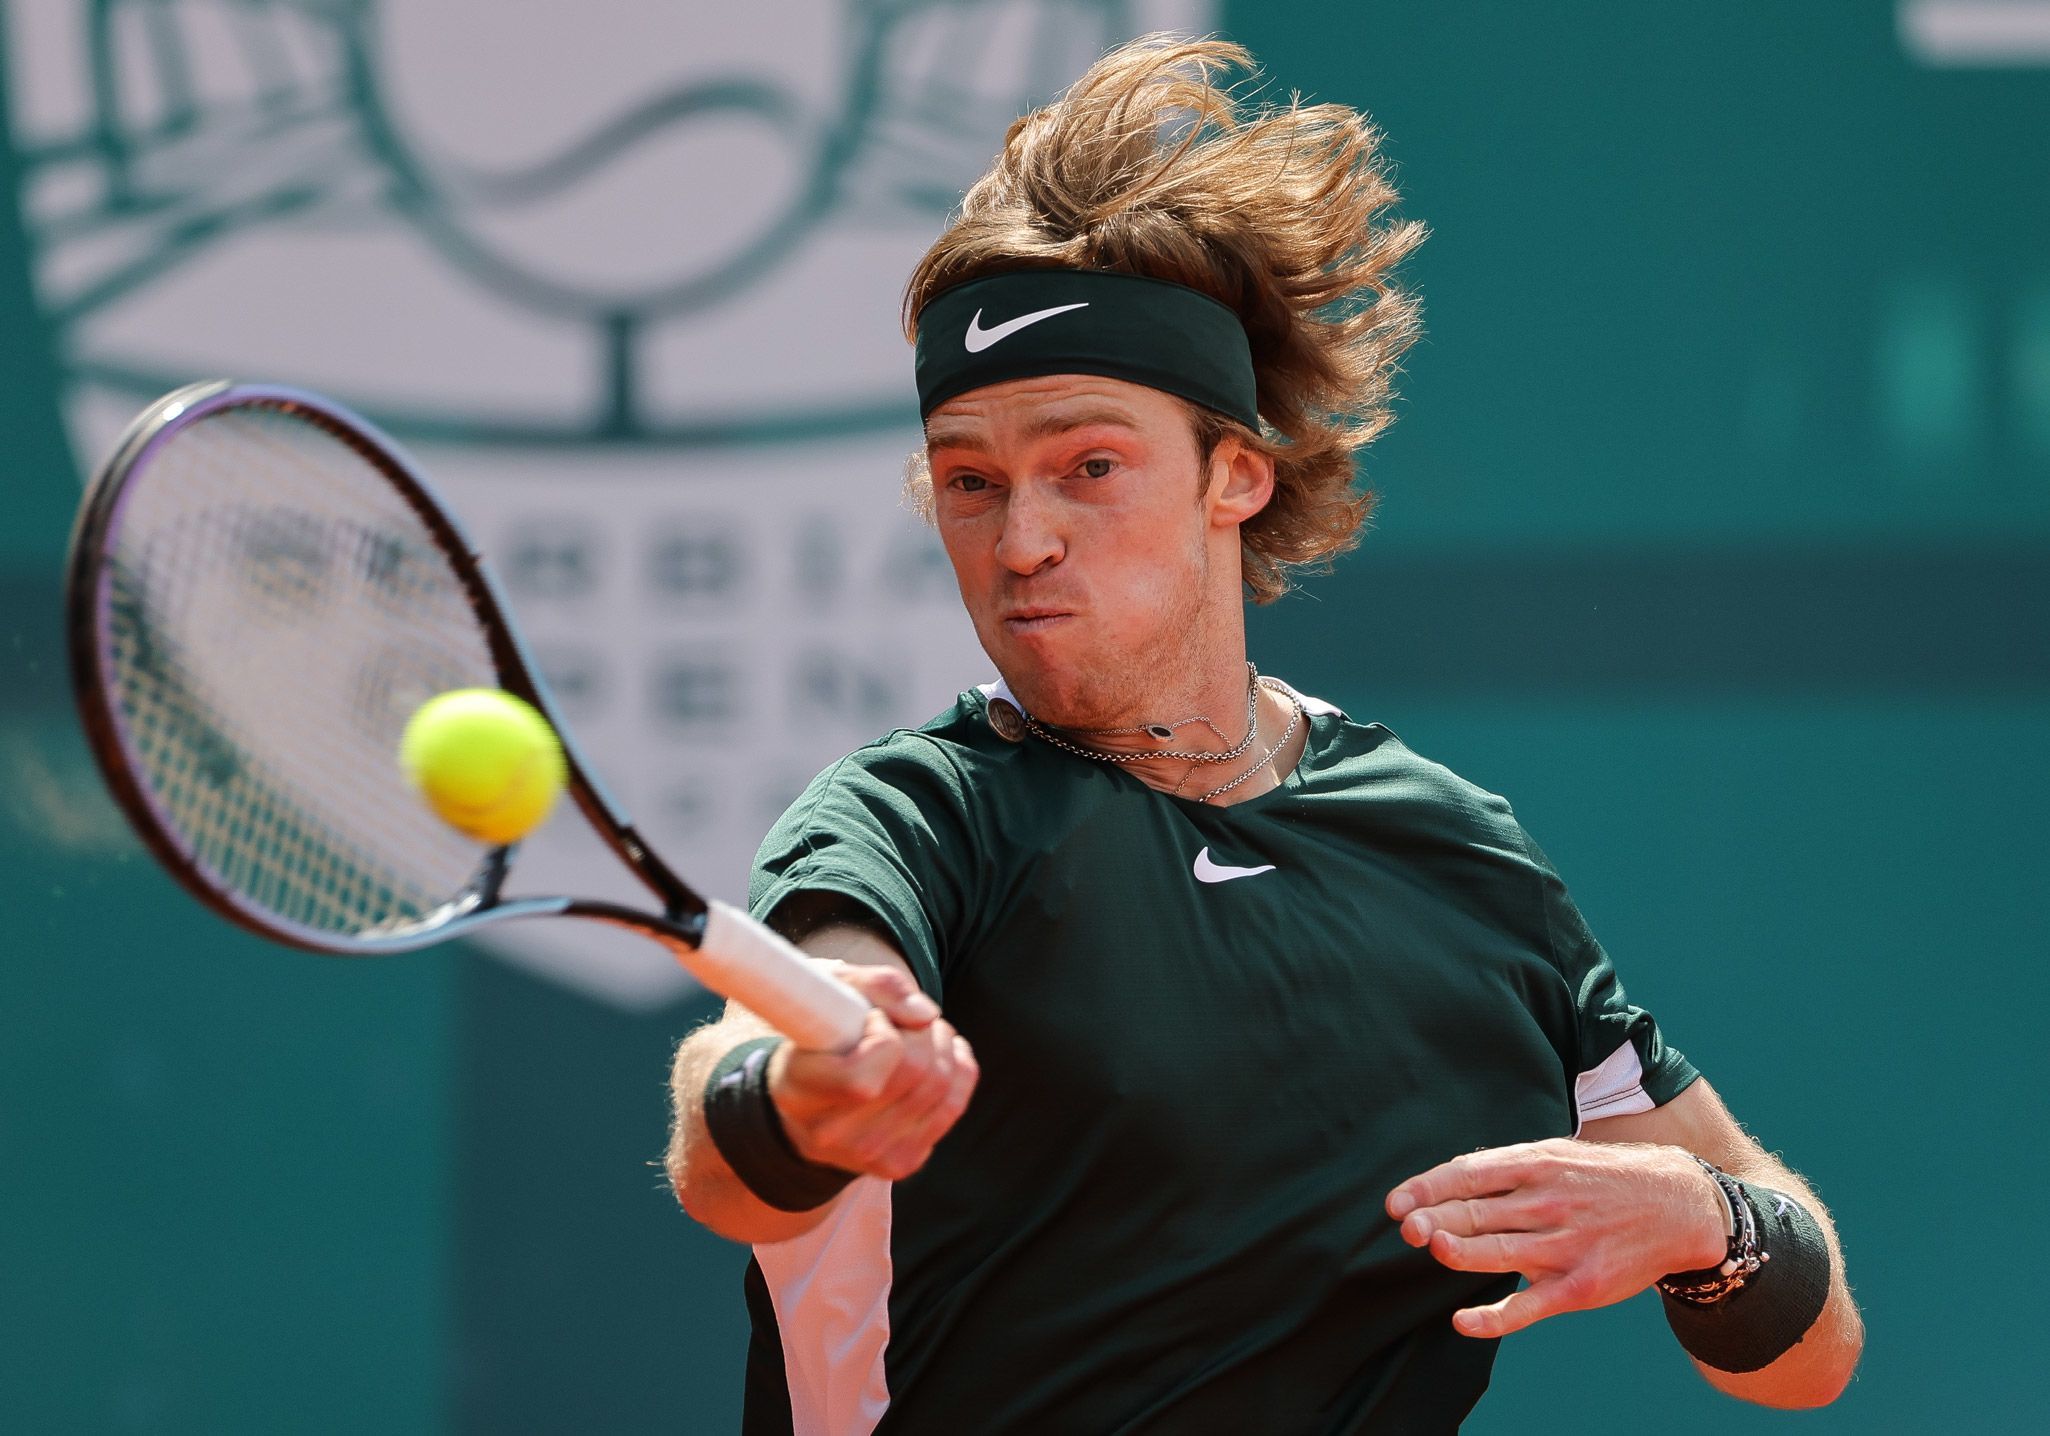 Andrey Rublev vs. Emil Ruusuvuori Prediction, Betting Tips & Odds │19 JANUARY, 2023